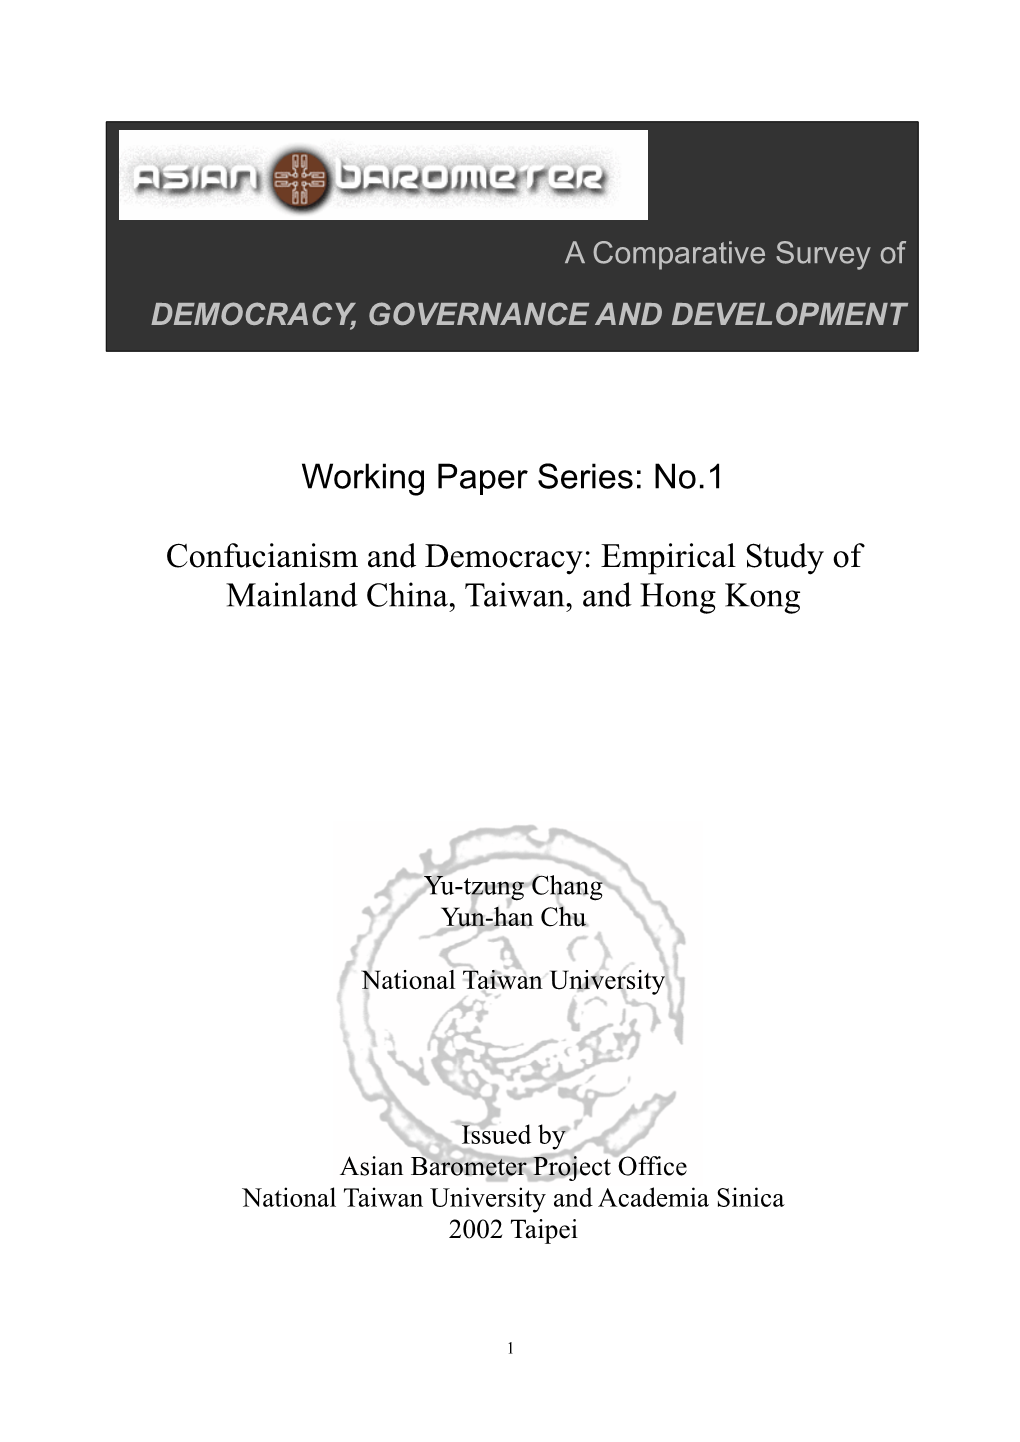 Working Paper Series: No.1 Confucianism and Democracy